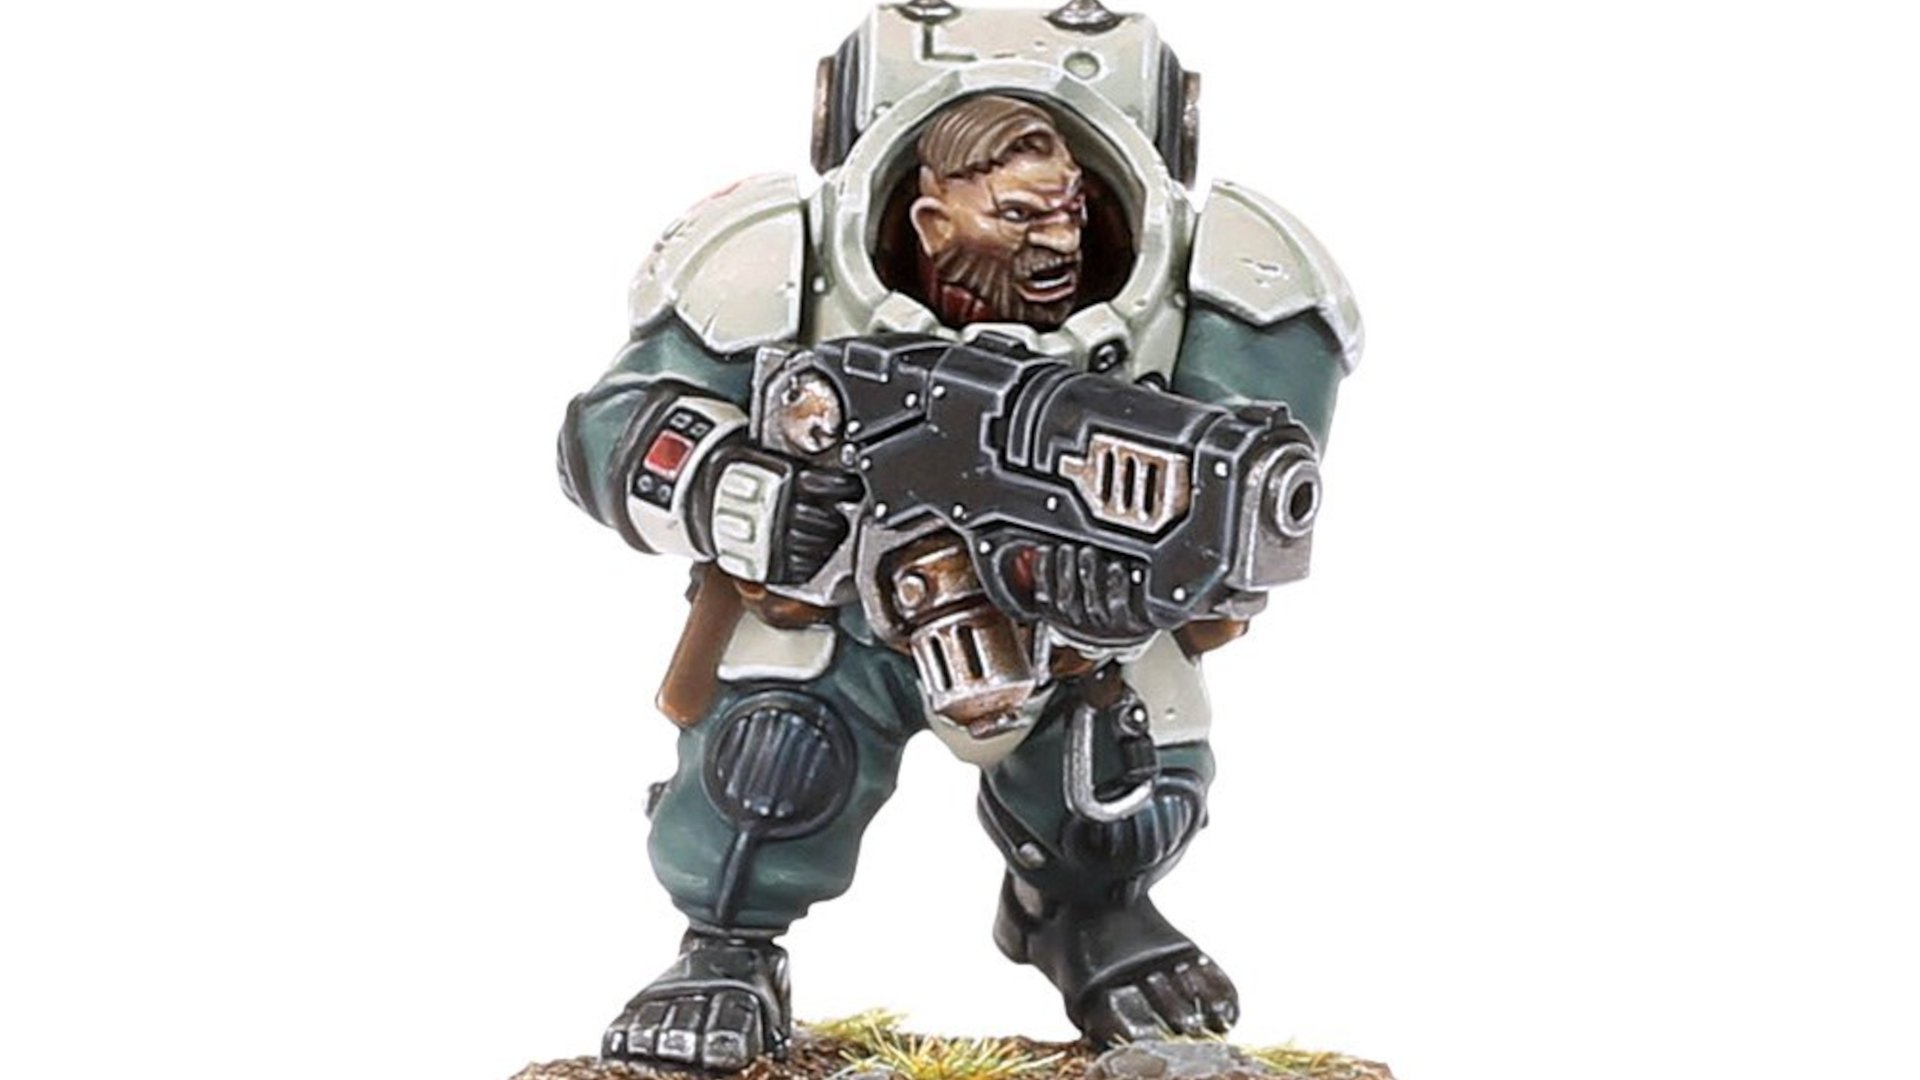 Warhammer 40k Leagues of Votann guide - Games Workshop photo showing a Hearthkyn Warrior model with Ion Blaster